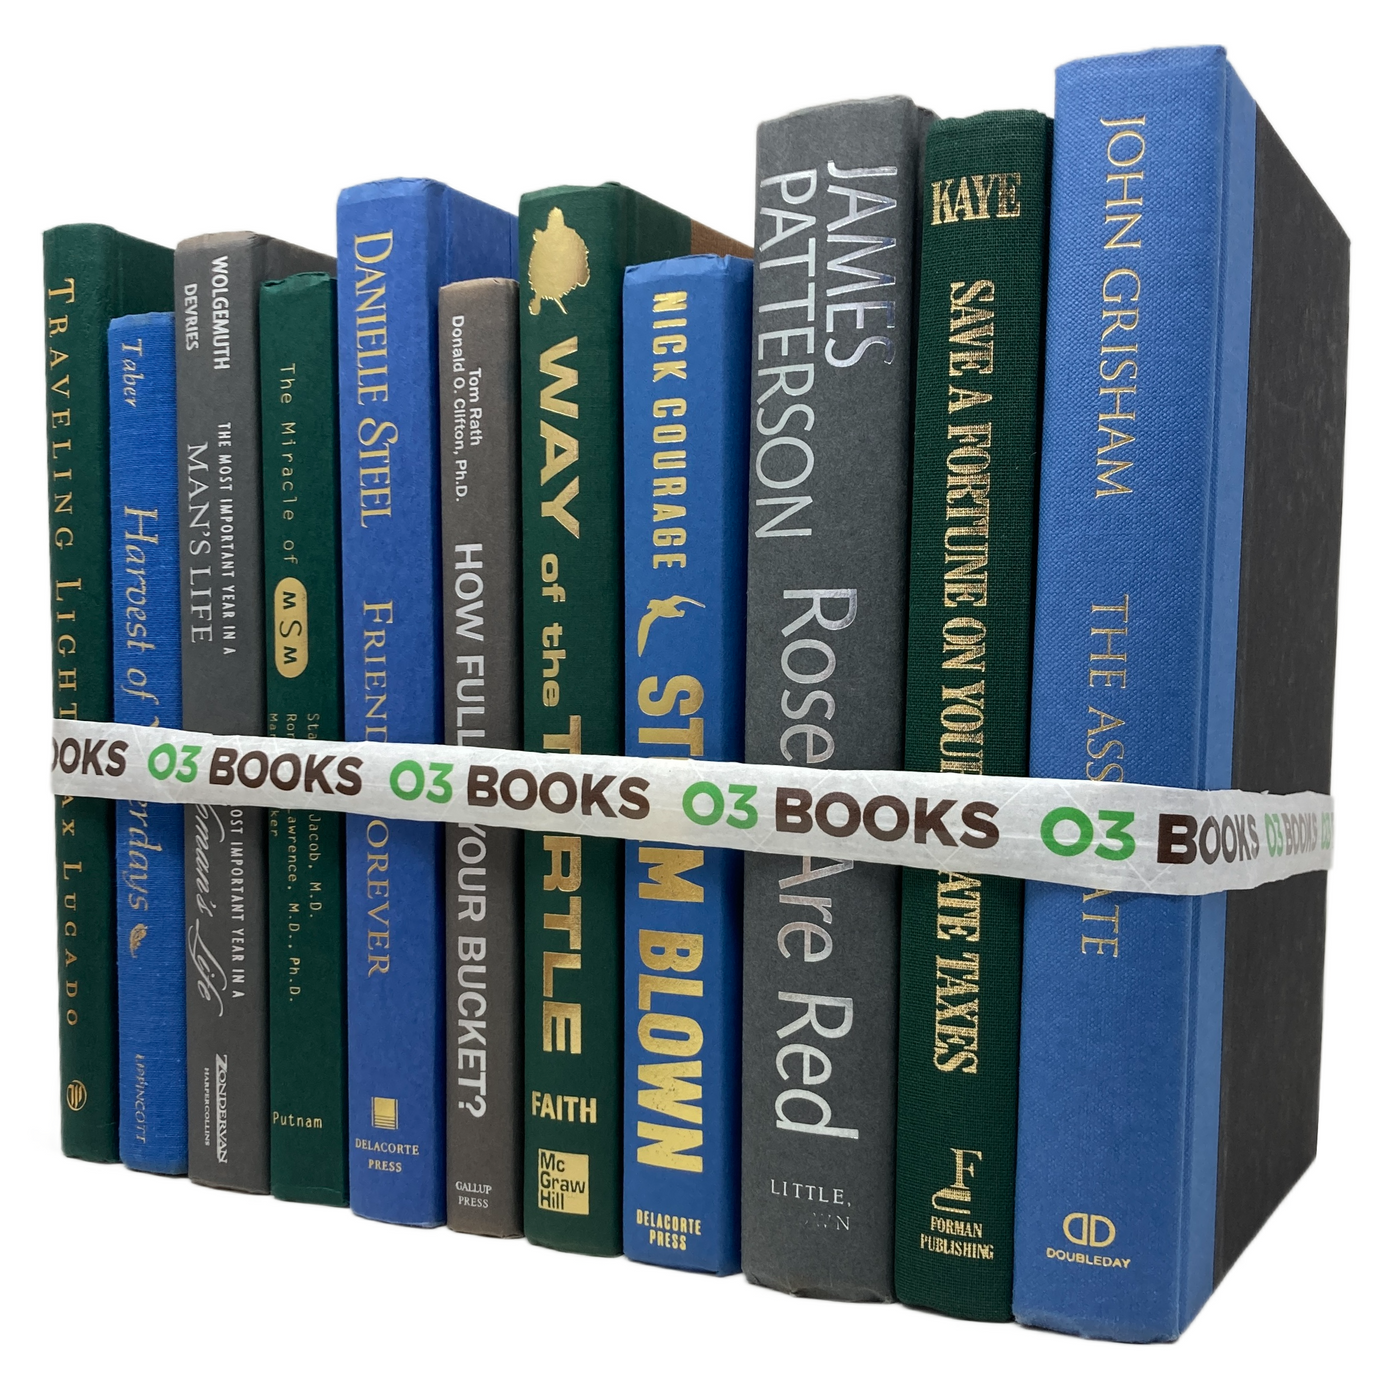 Forest Mist Decorative Books Green, Blue and Lightgray